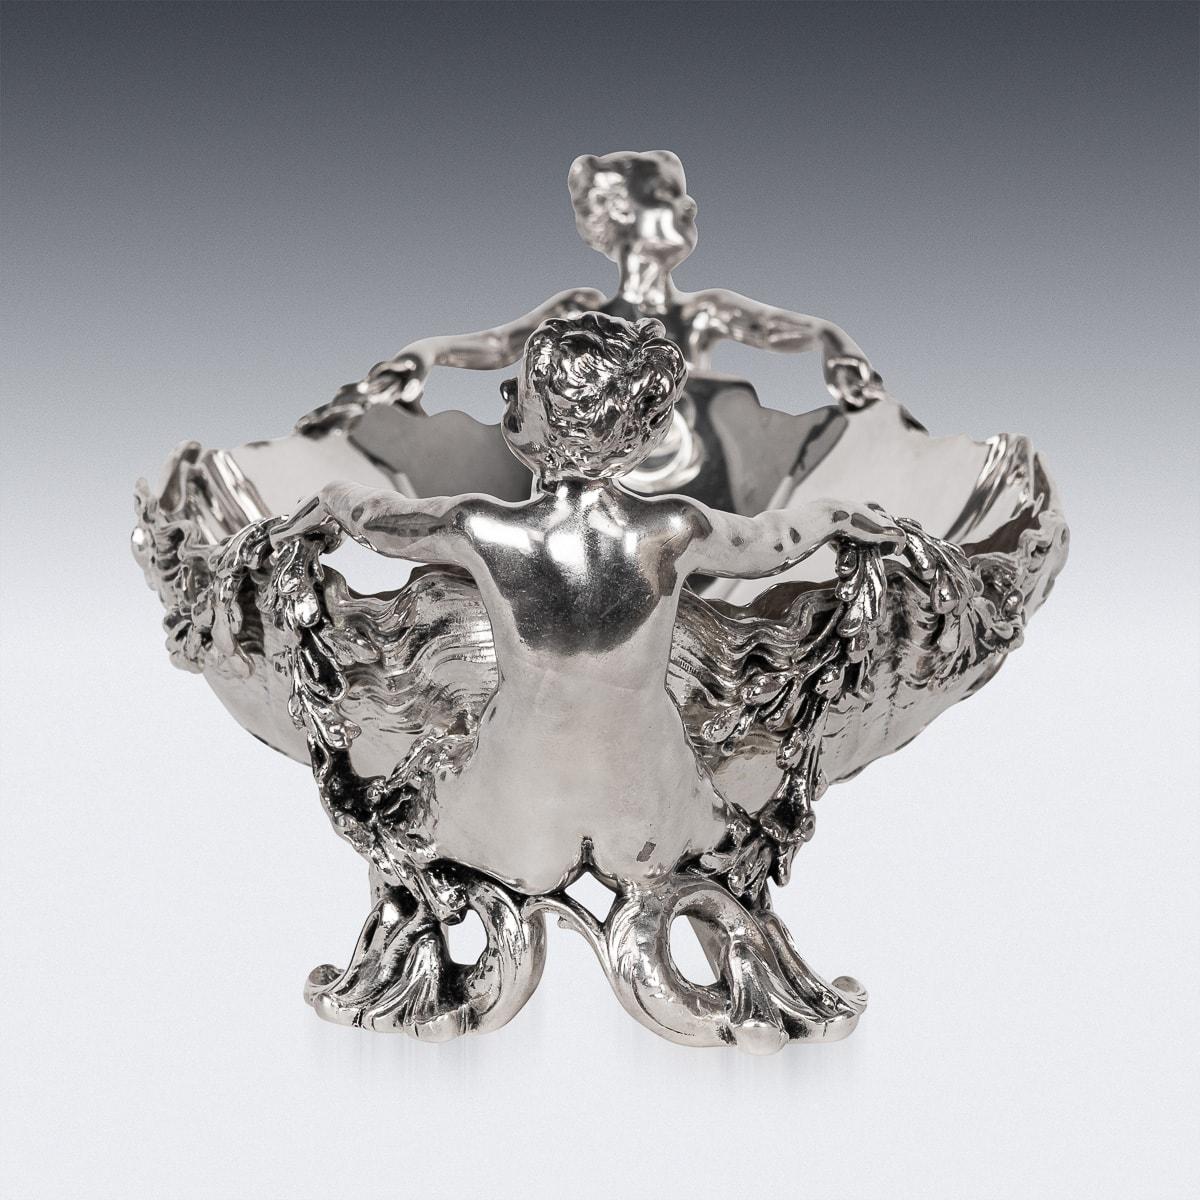 Late 19th Century Antique 19th Century French Silver Plated Figural Centrepiece, Christofle c.1880 For Sale